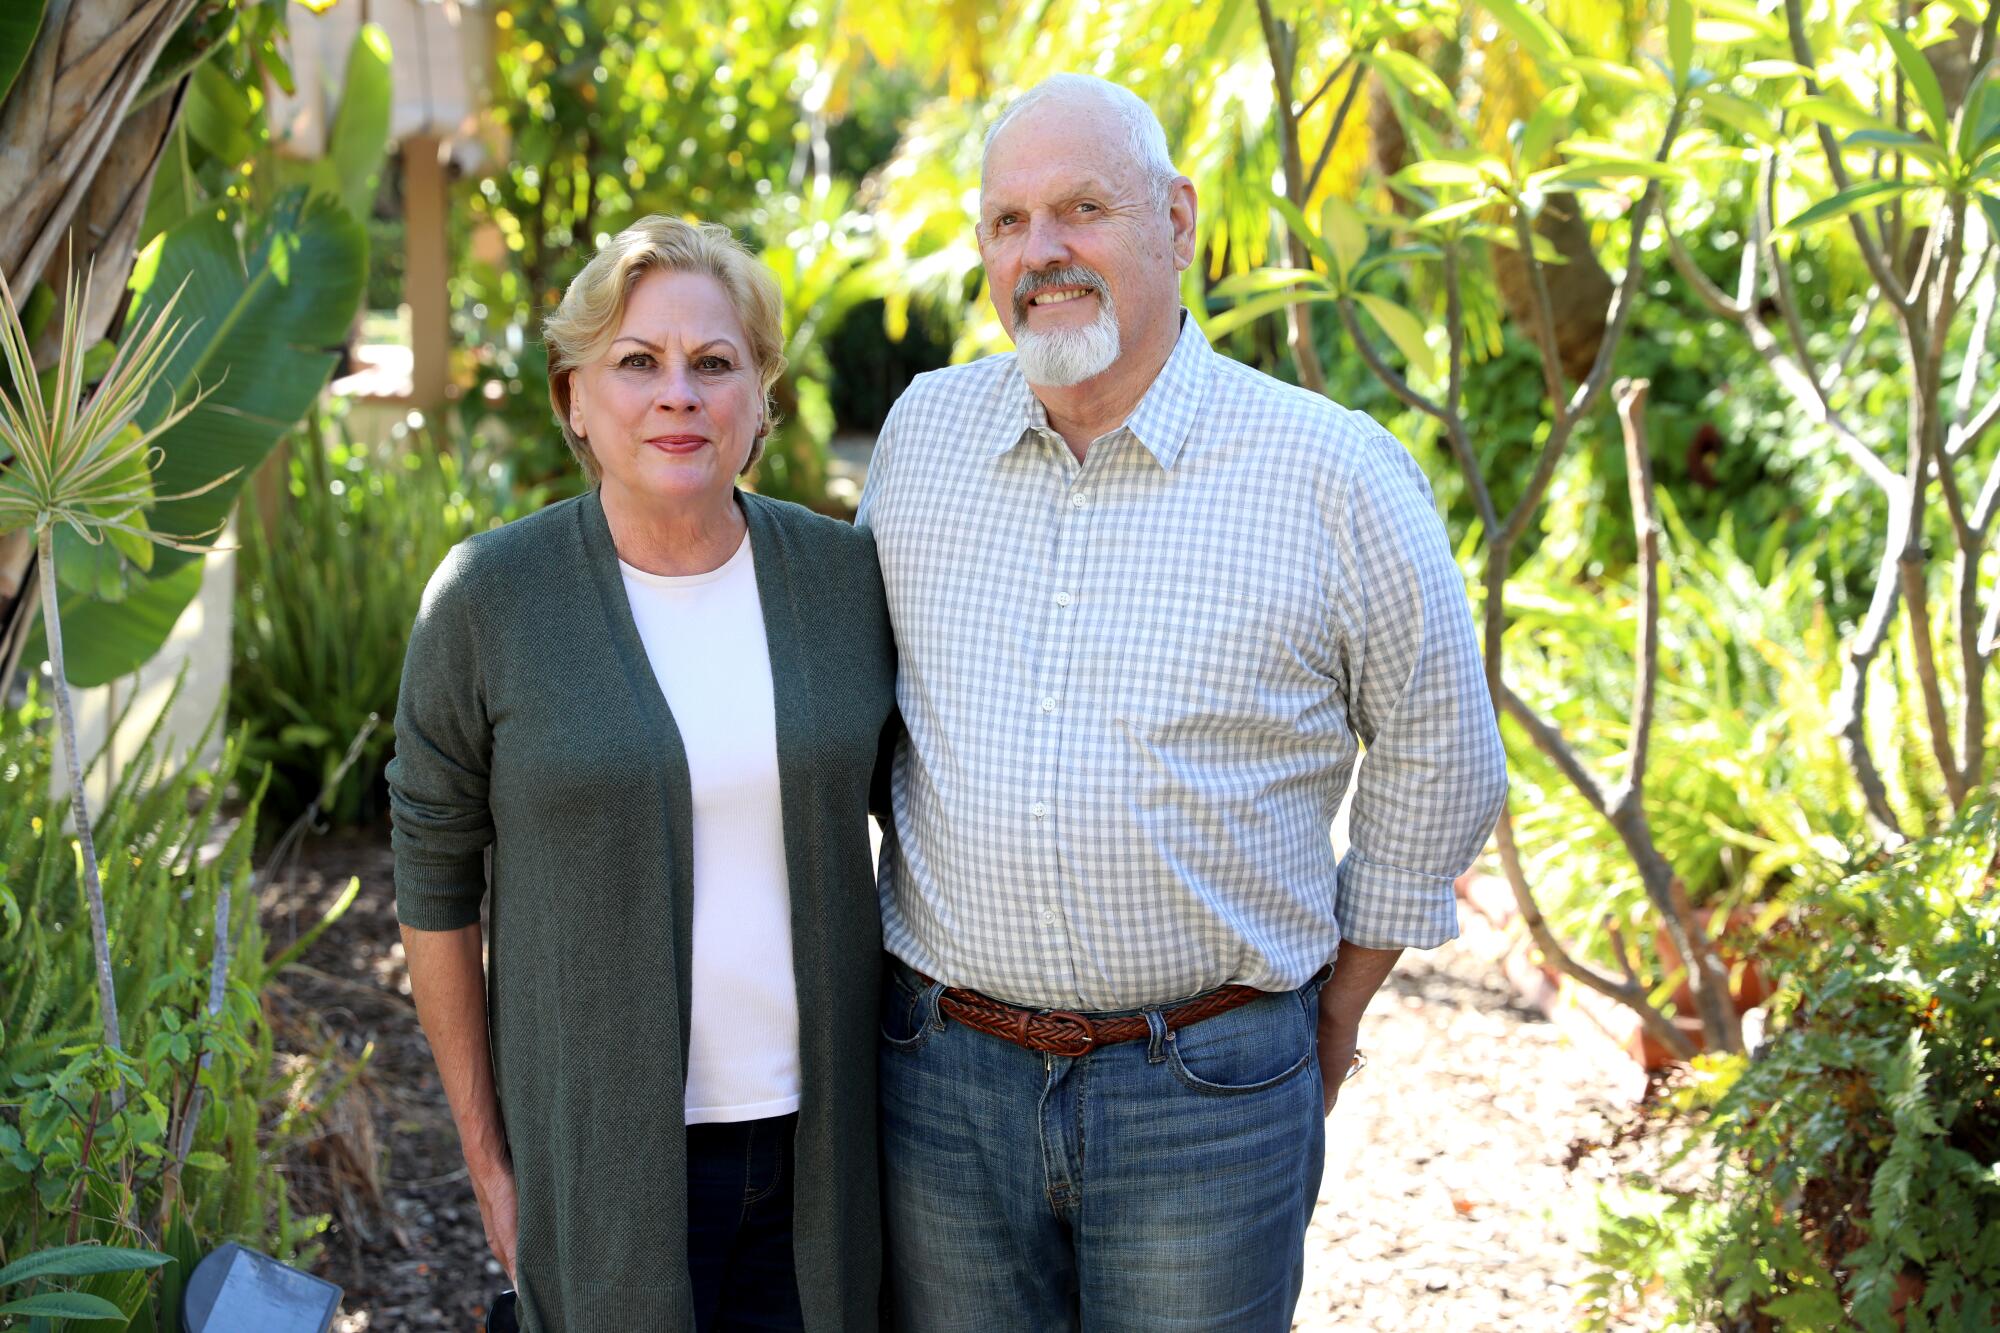 Barbara and Bob Kiley, who were political consultants for "Yes on 187," at their home in Yorba Linda last week.